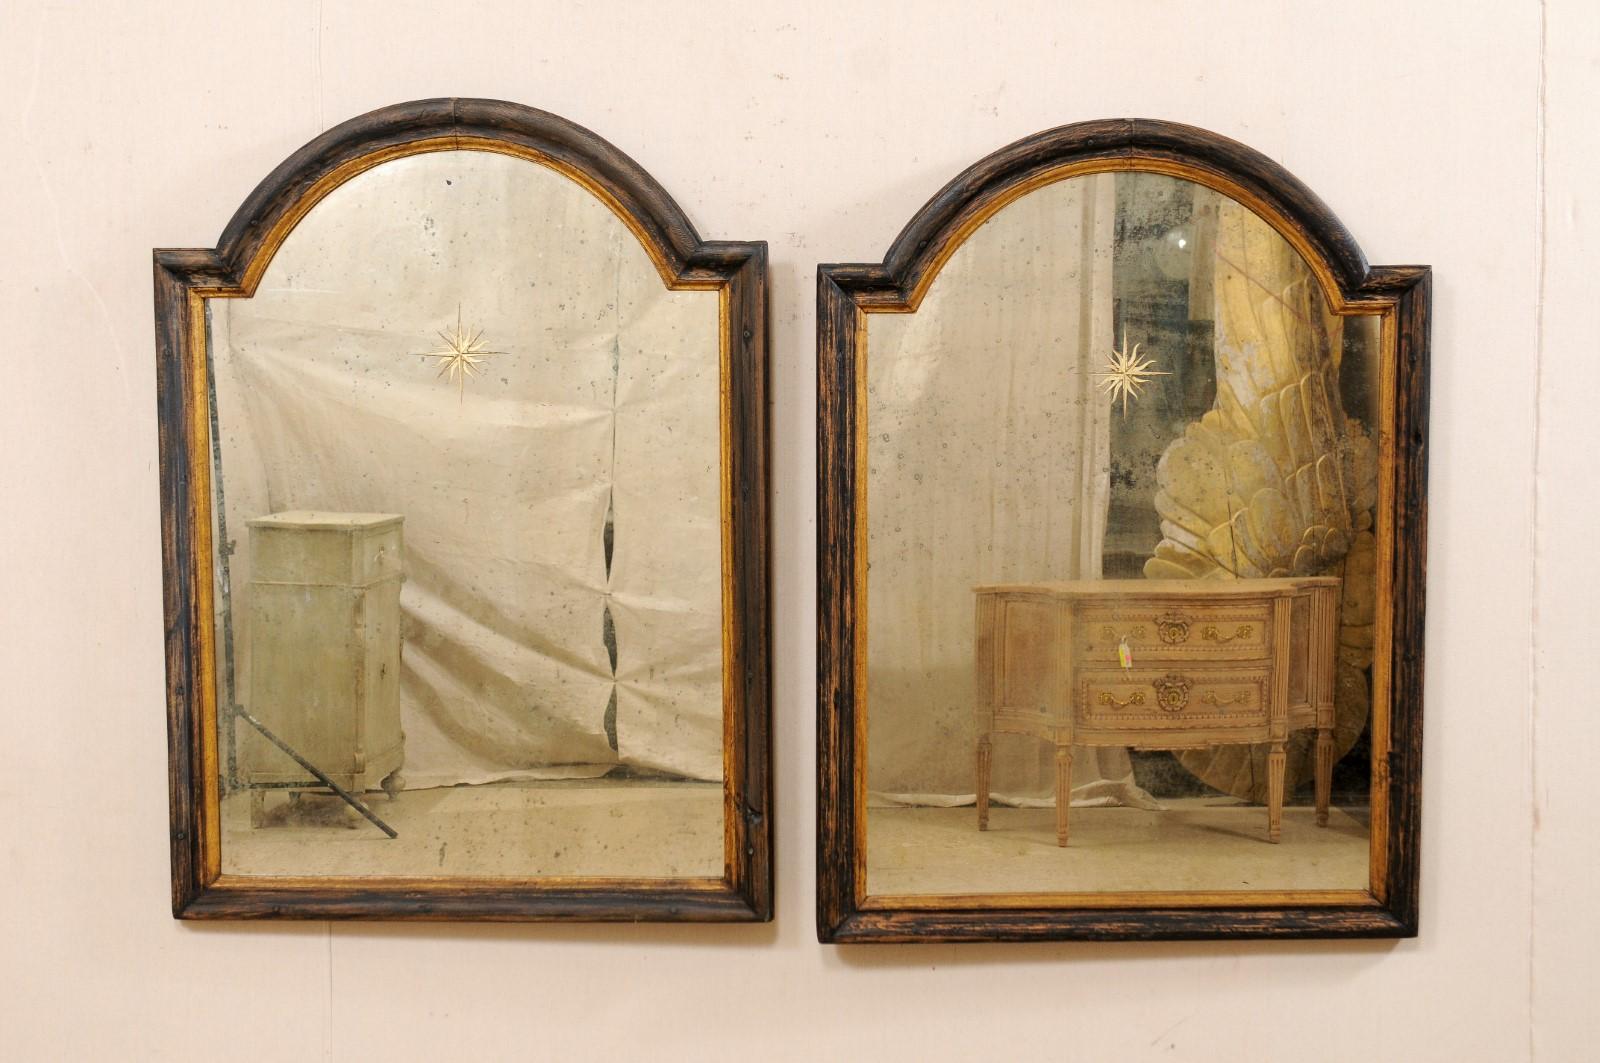 A French pair of 19th century mirrors with sunburst églomisé center. This antique pair of mold-trimmed wooden mirror surrounds from France each feature a convexly arched top, with straight lines making up the sides and bottom. The center glass is